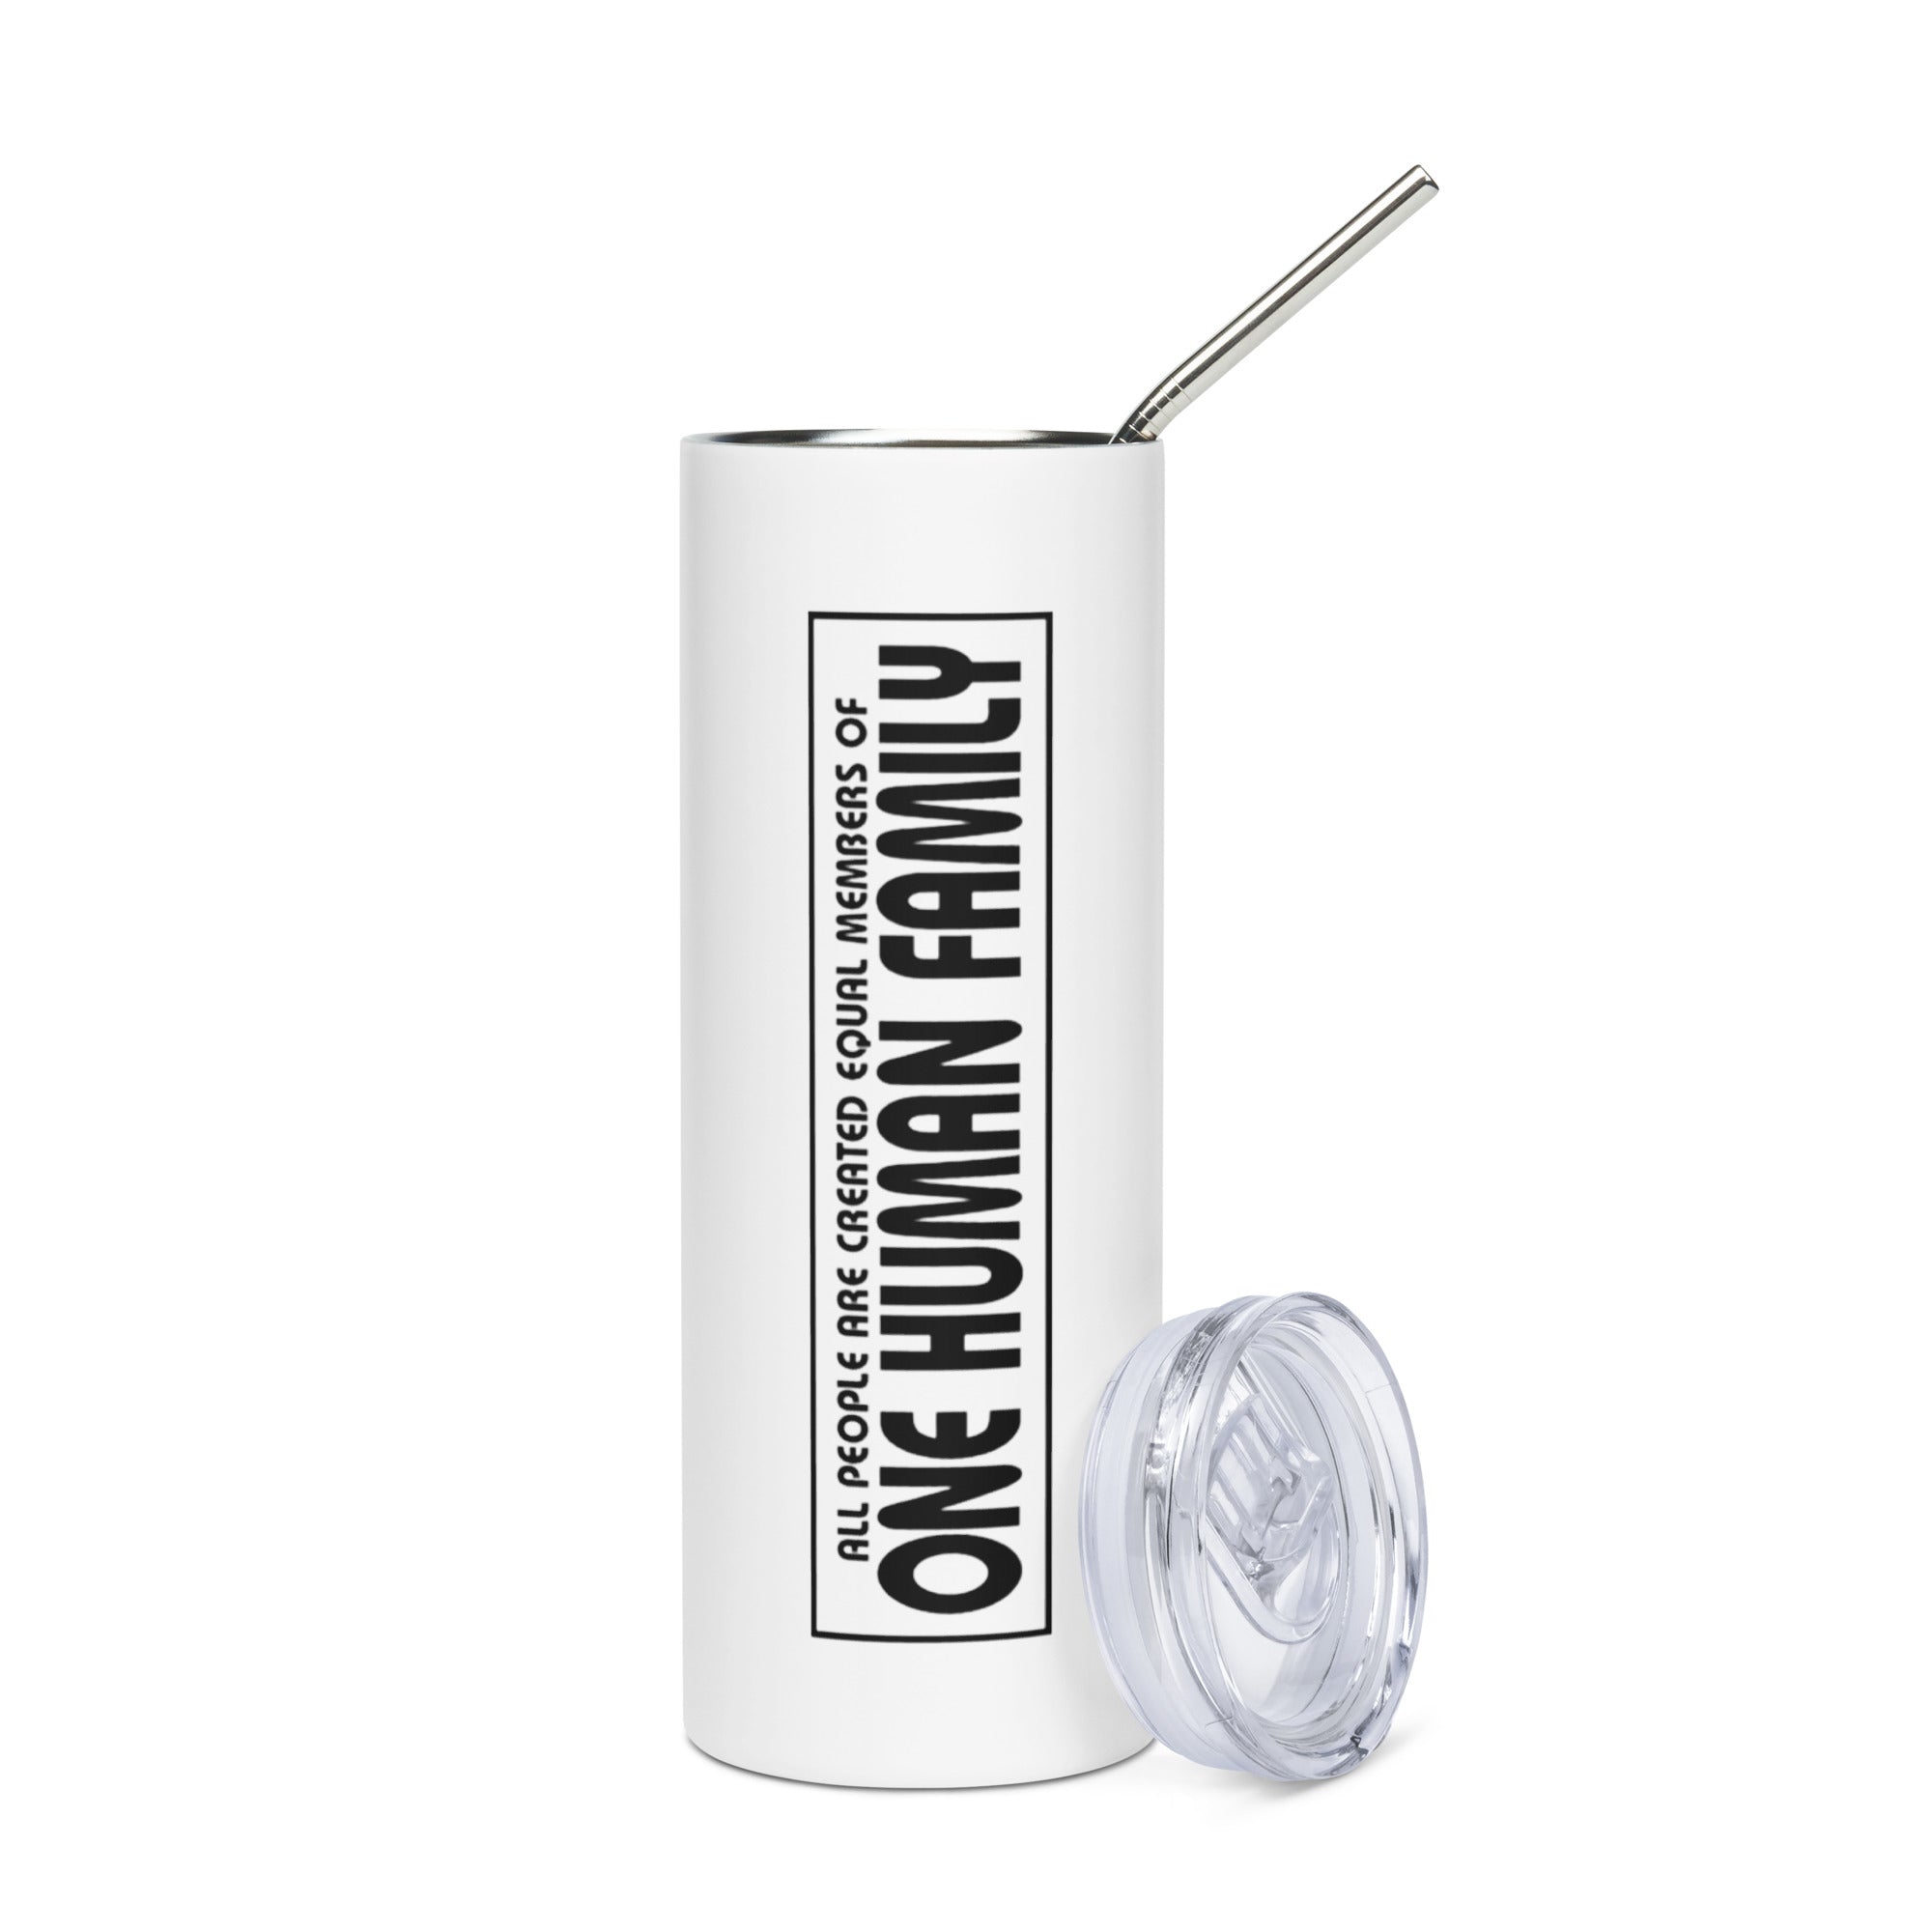 One Human Family Stainless Steel Tumbler